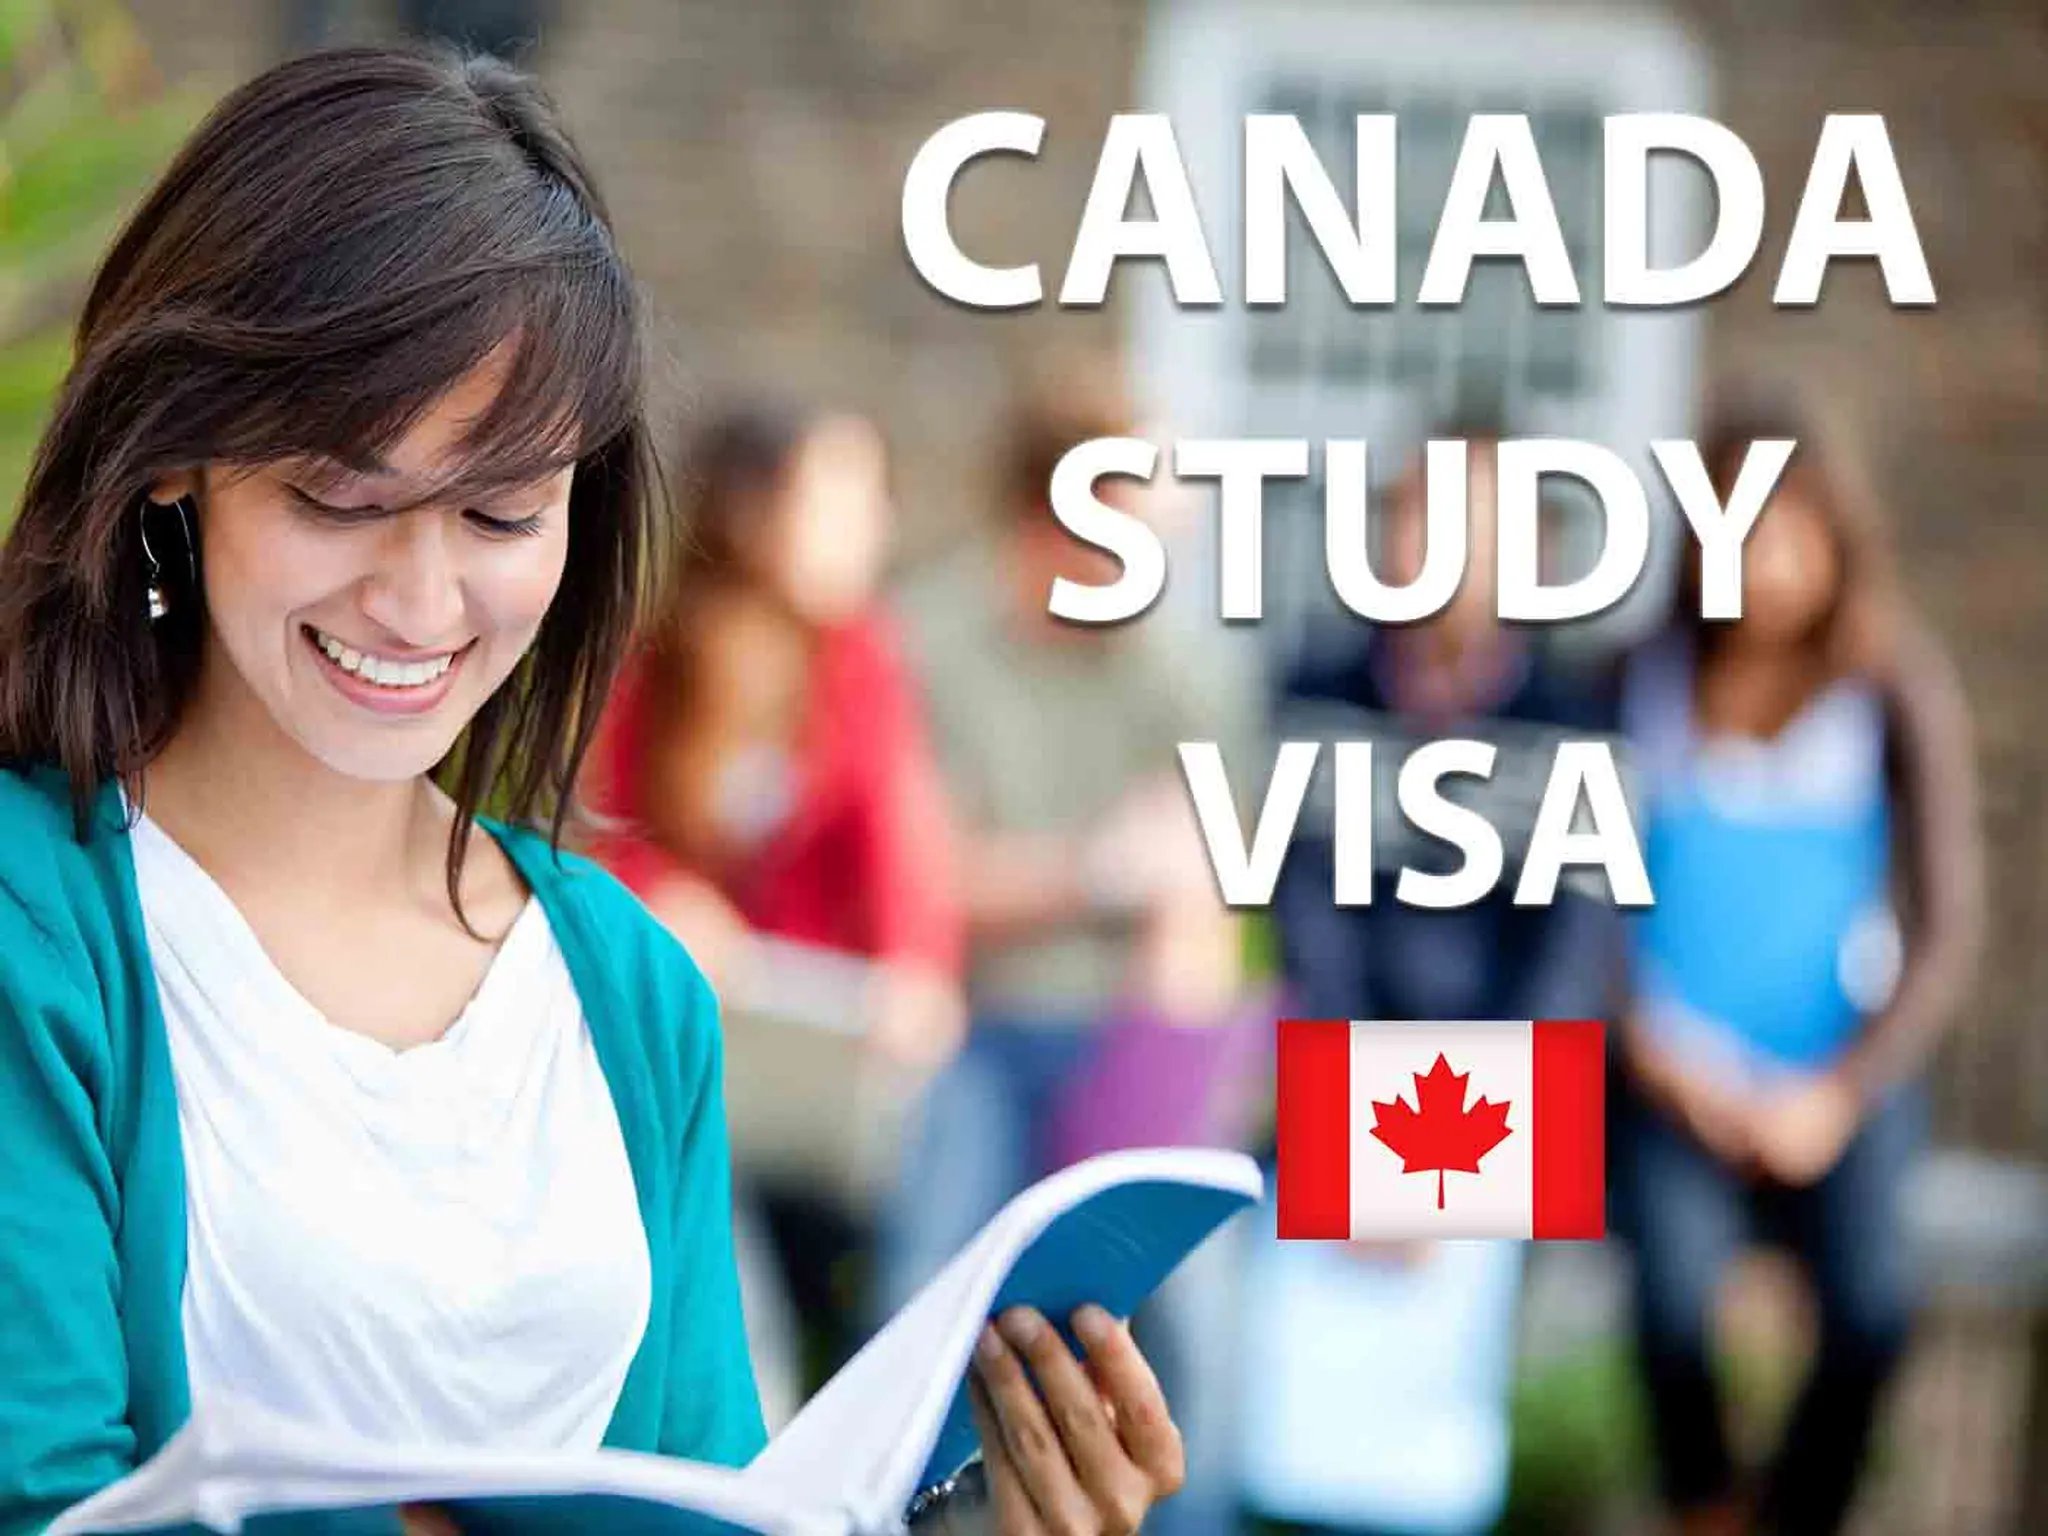 Canada issues updated regulations for international student visas To prevent improper use